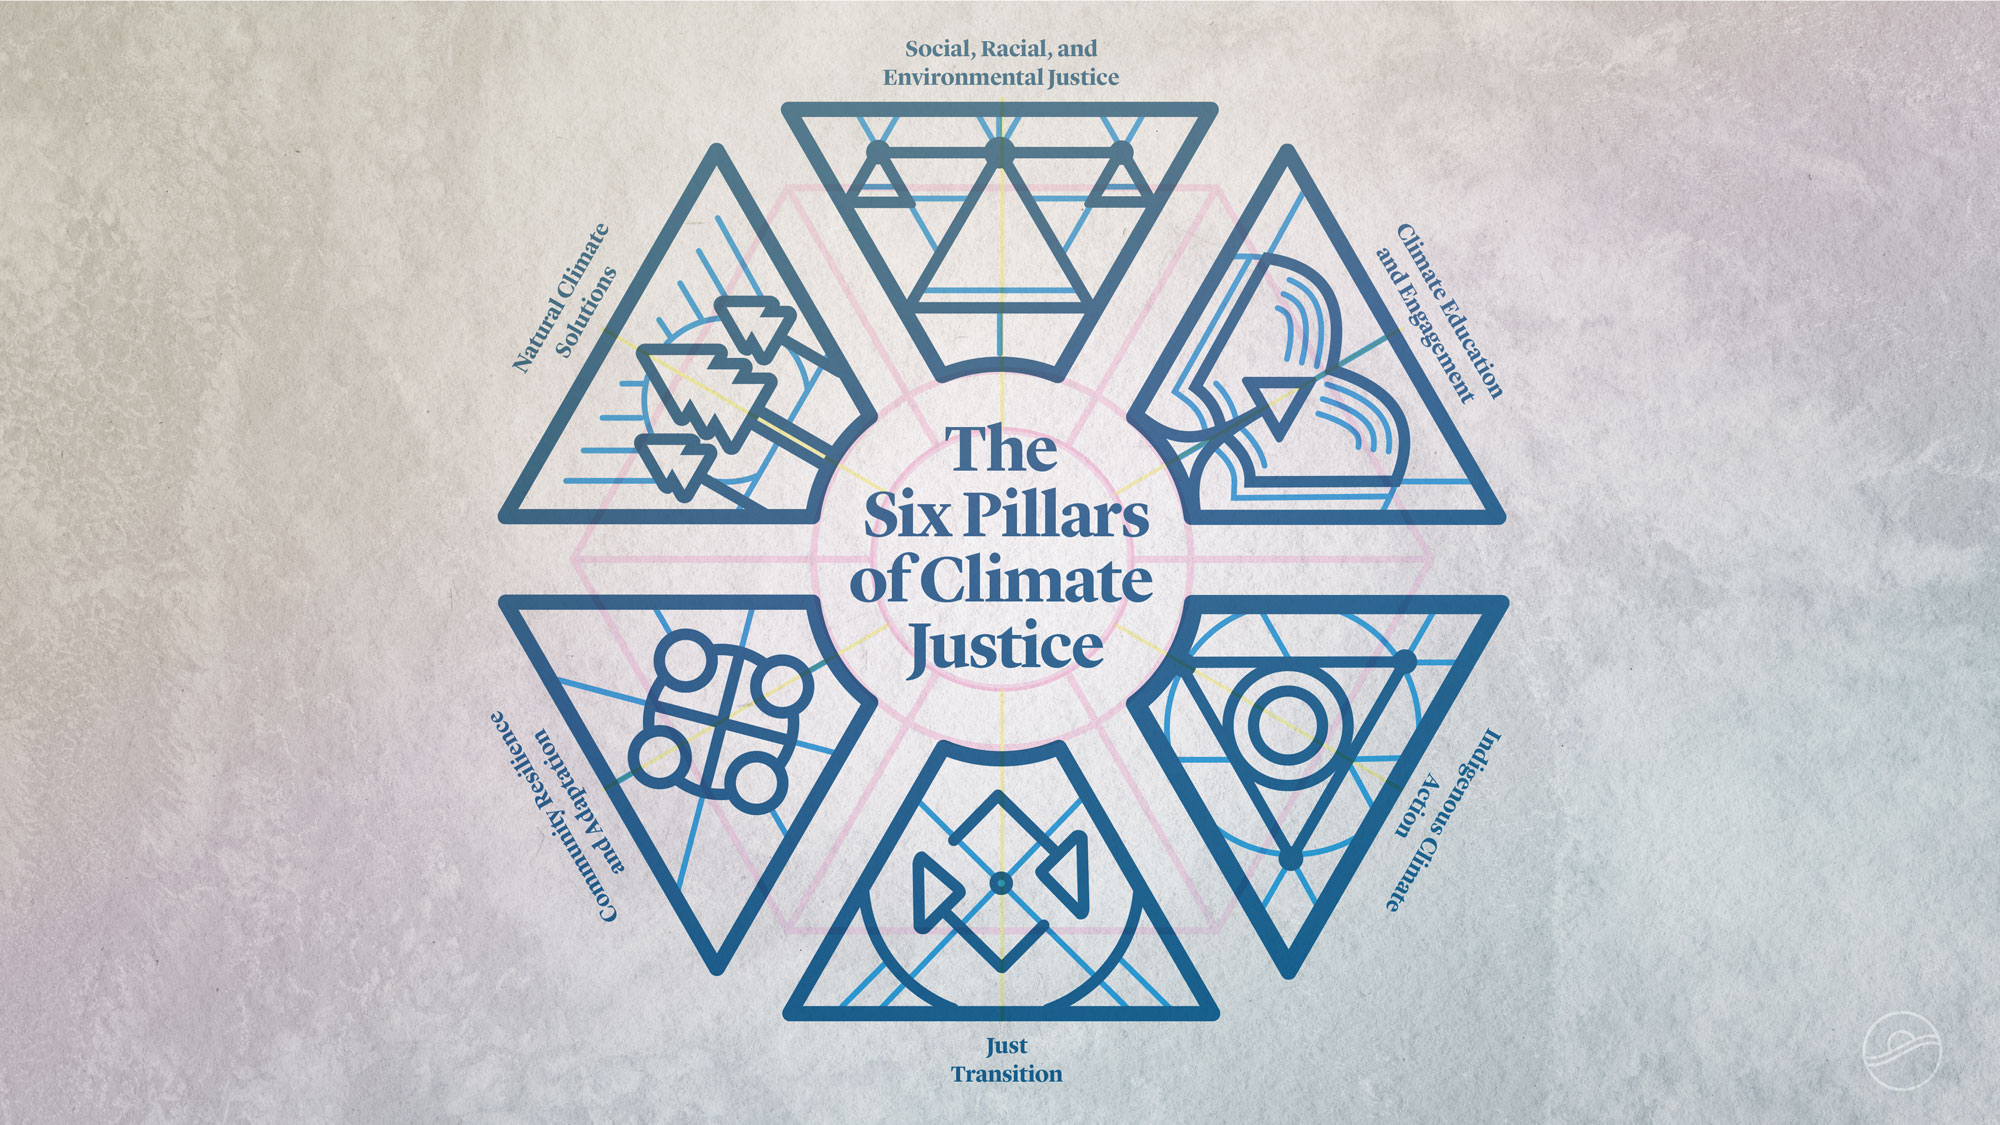 The Six Pillars of Climate Justice